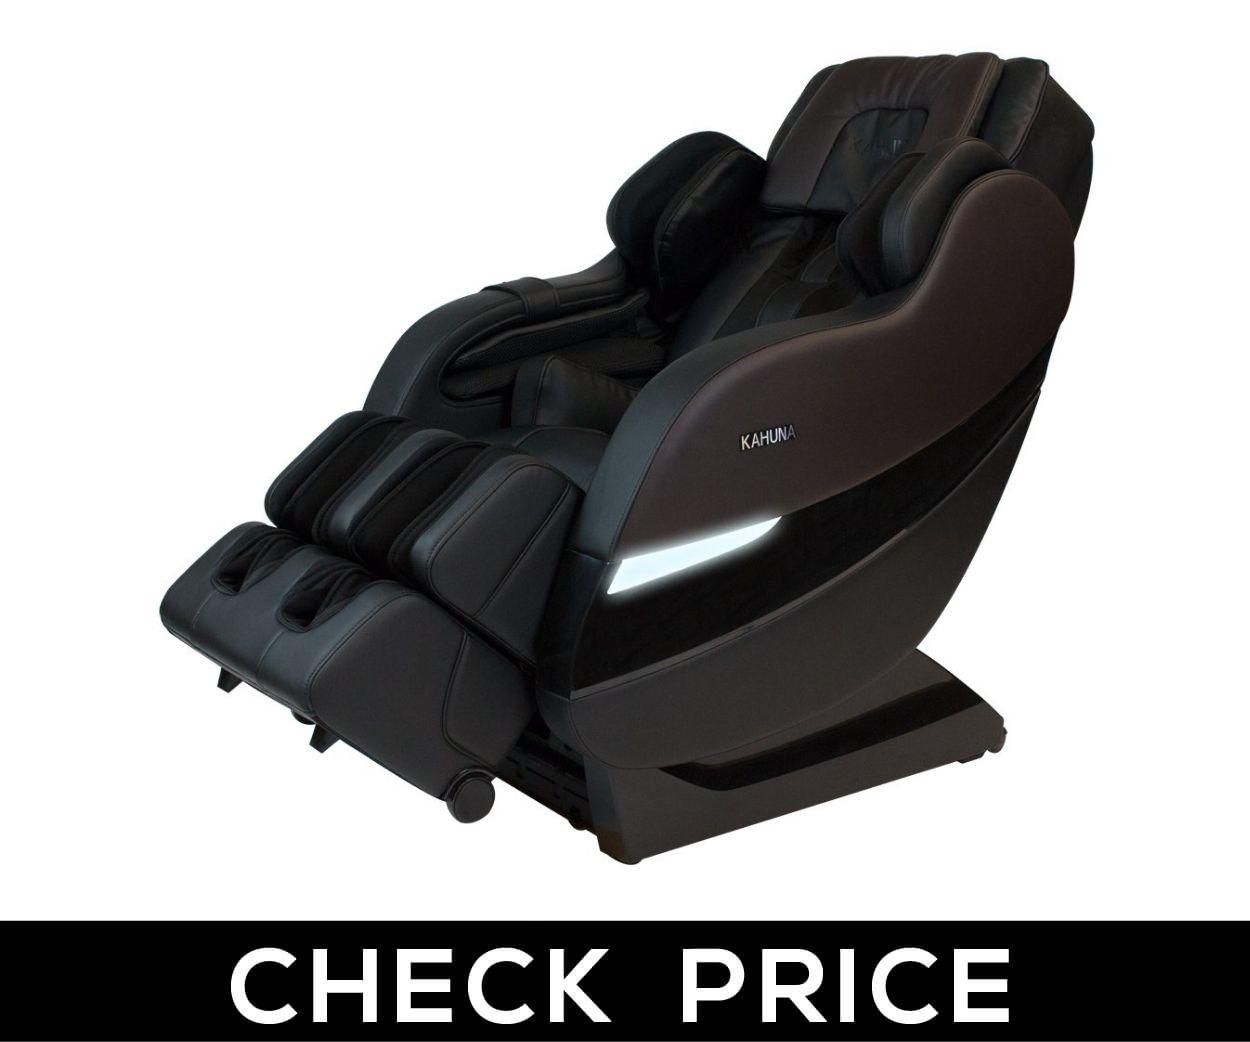 Kahuna SM-7300 â€“ Best Massage Chair for Home